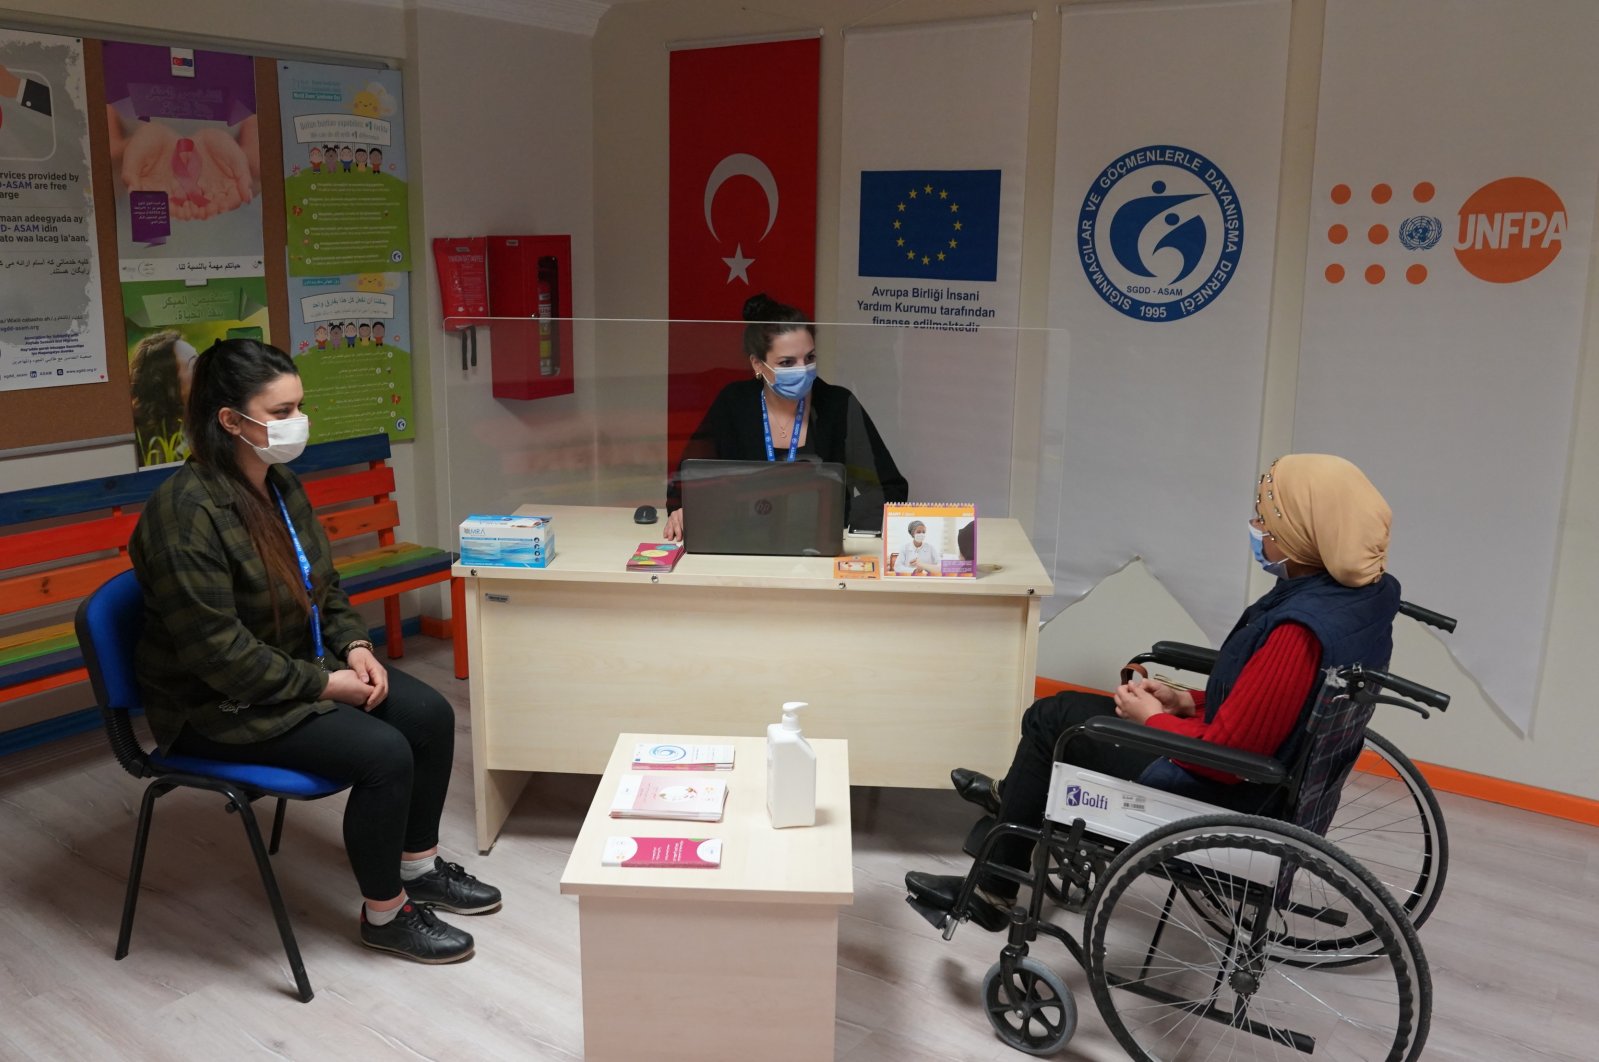 A disabled refugee speaks to a UNFPA worker at an unidentified UNFPA office in Turkey. (UNFPA Photo)